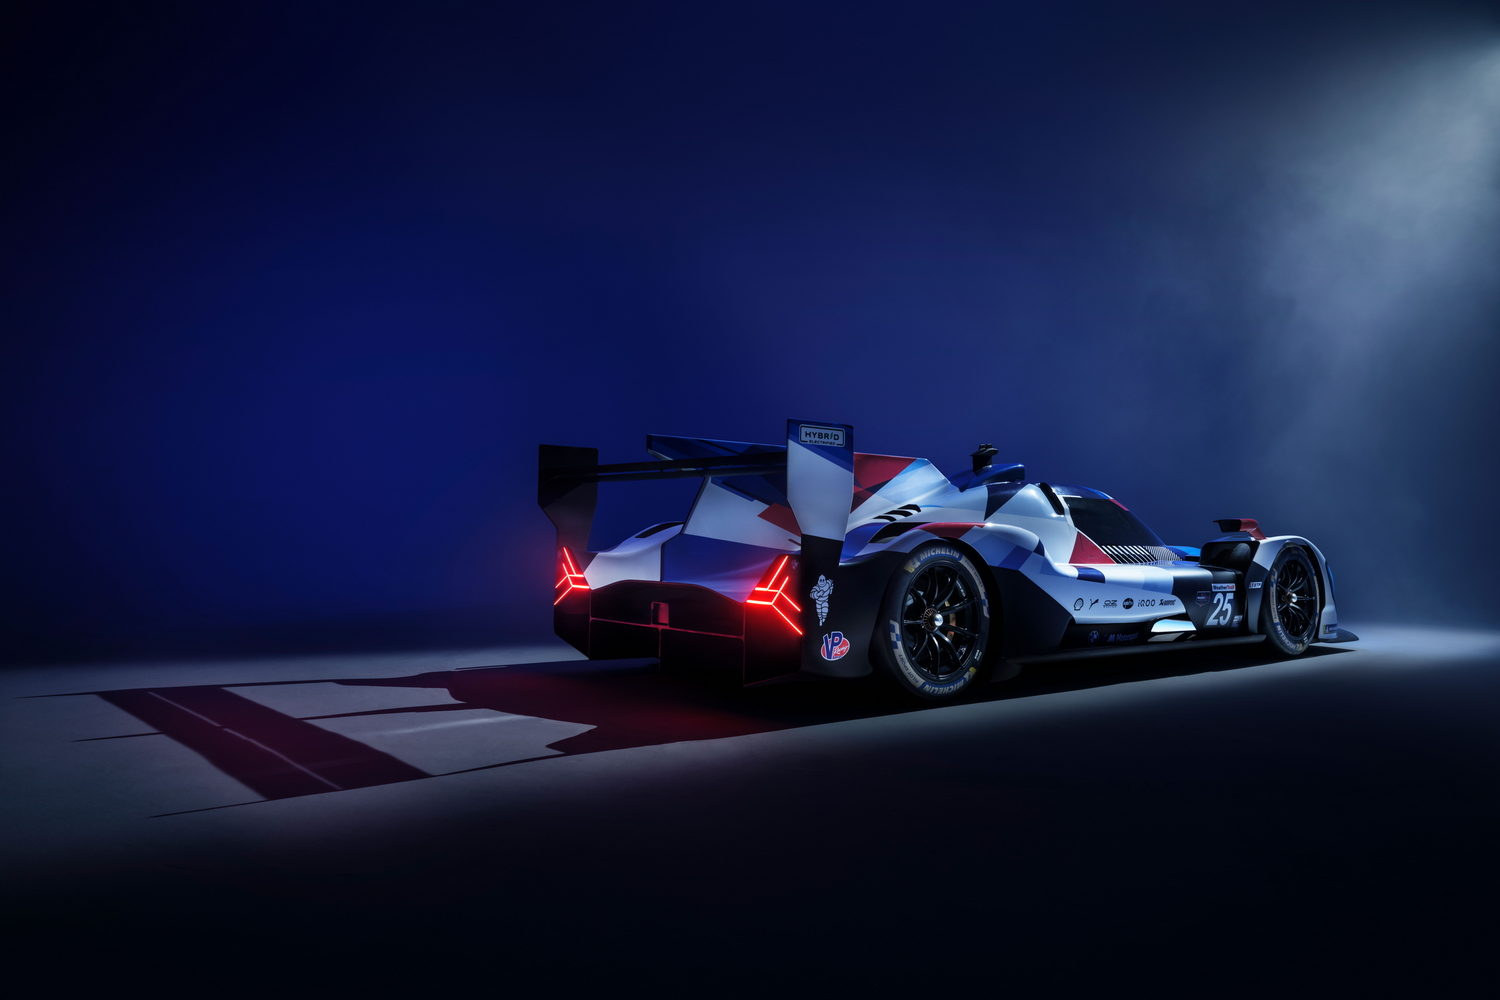 BMW shows off new racer